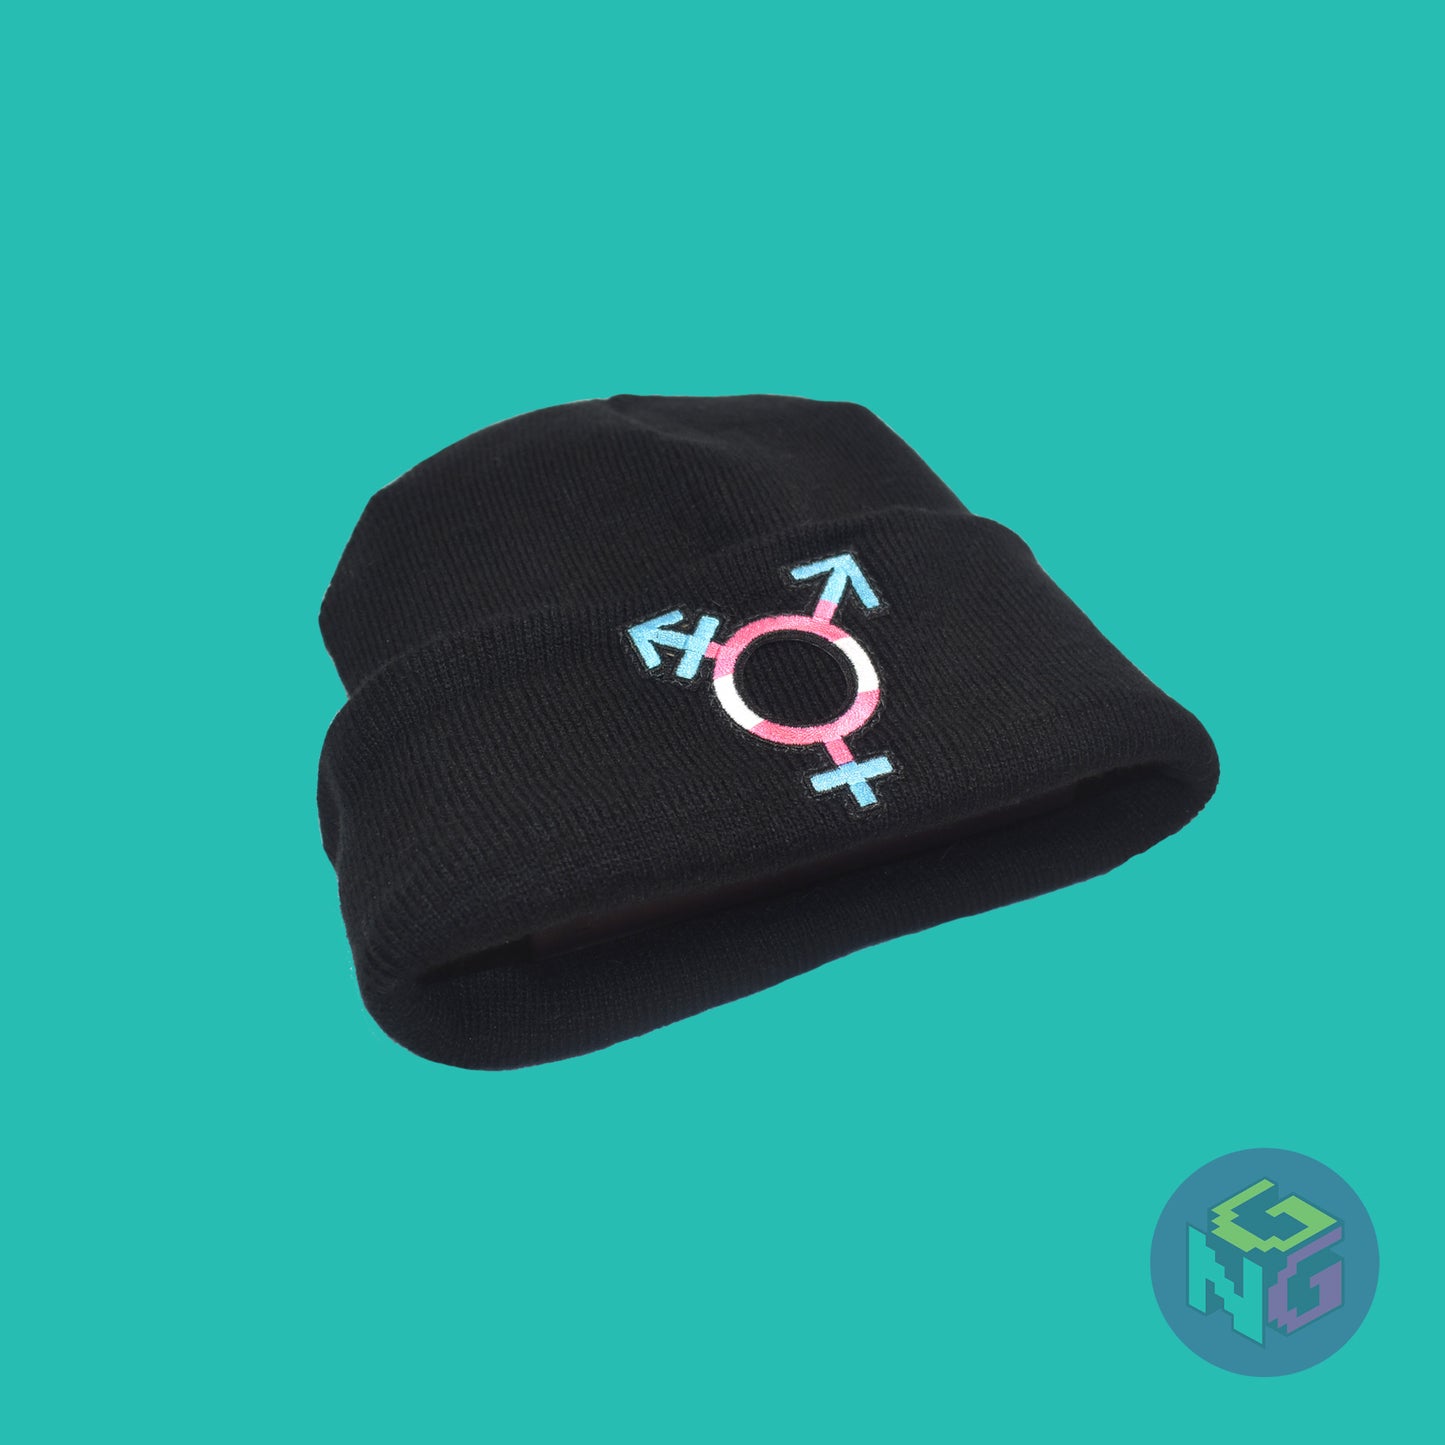 Black knit fabric beanie with the transgender symbol in blue, pink, and white on the front. It is laying flat, seen from the lower left on a mint green background